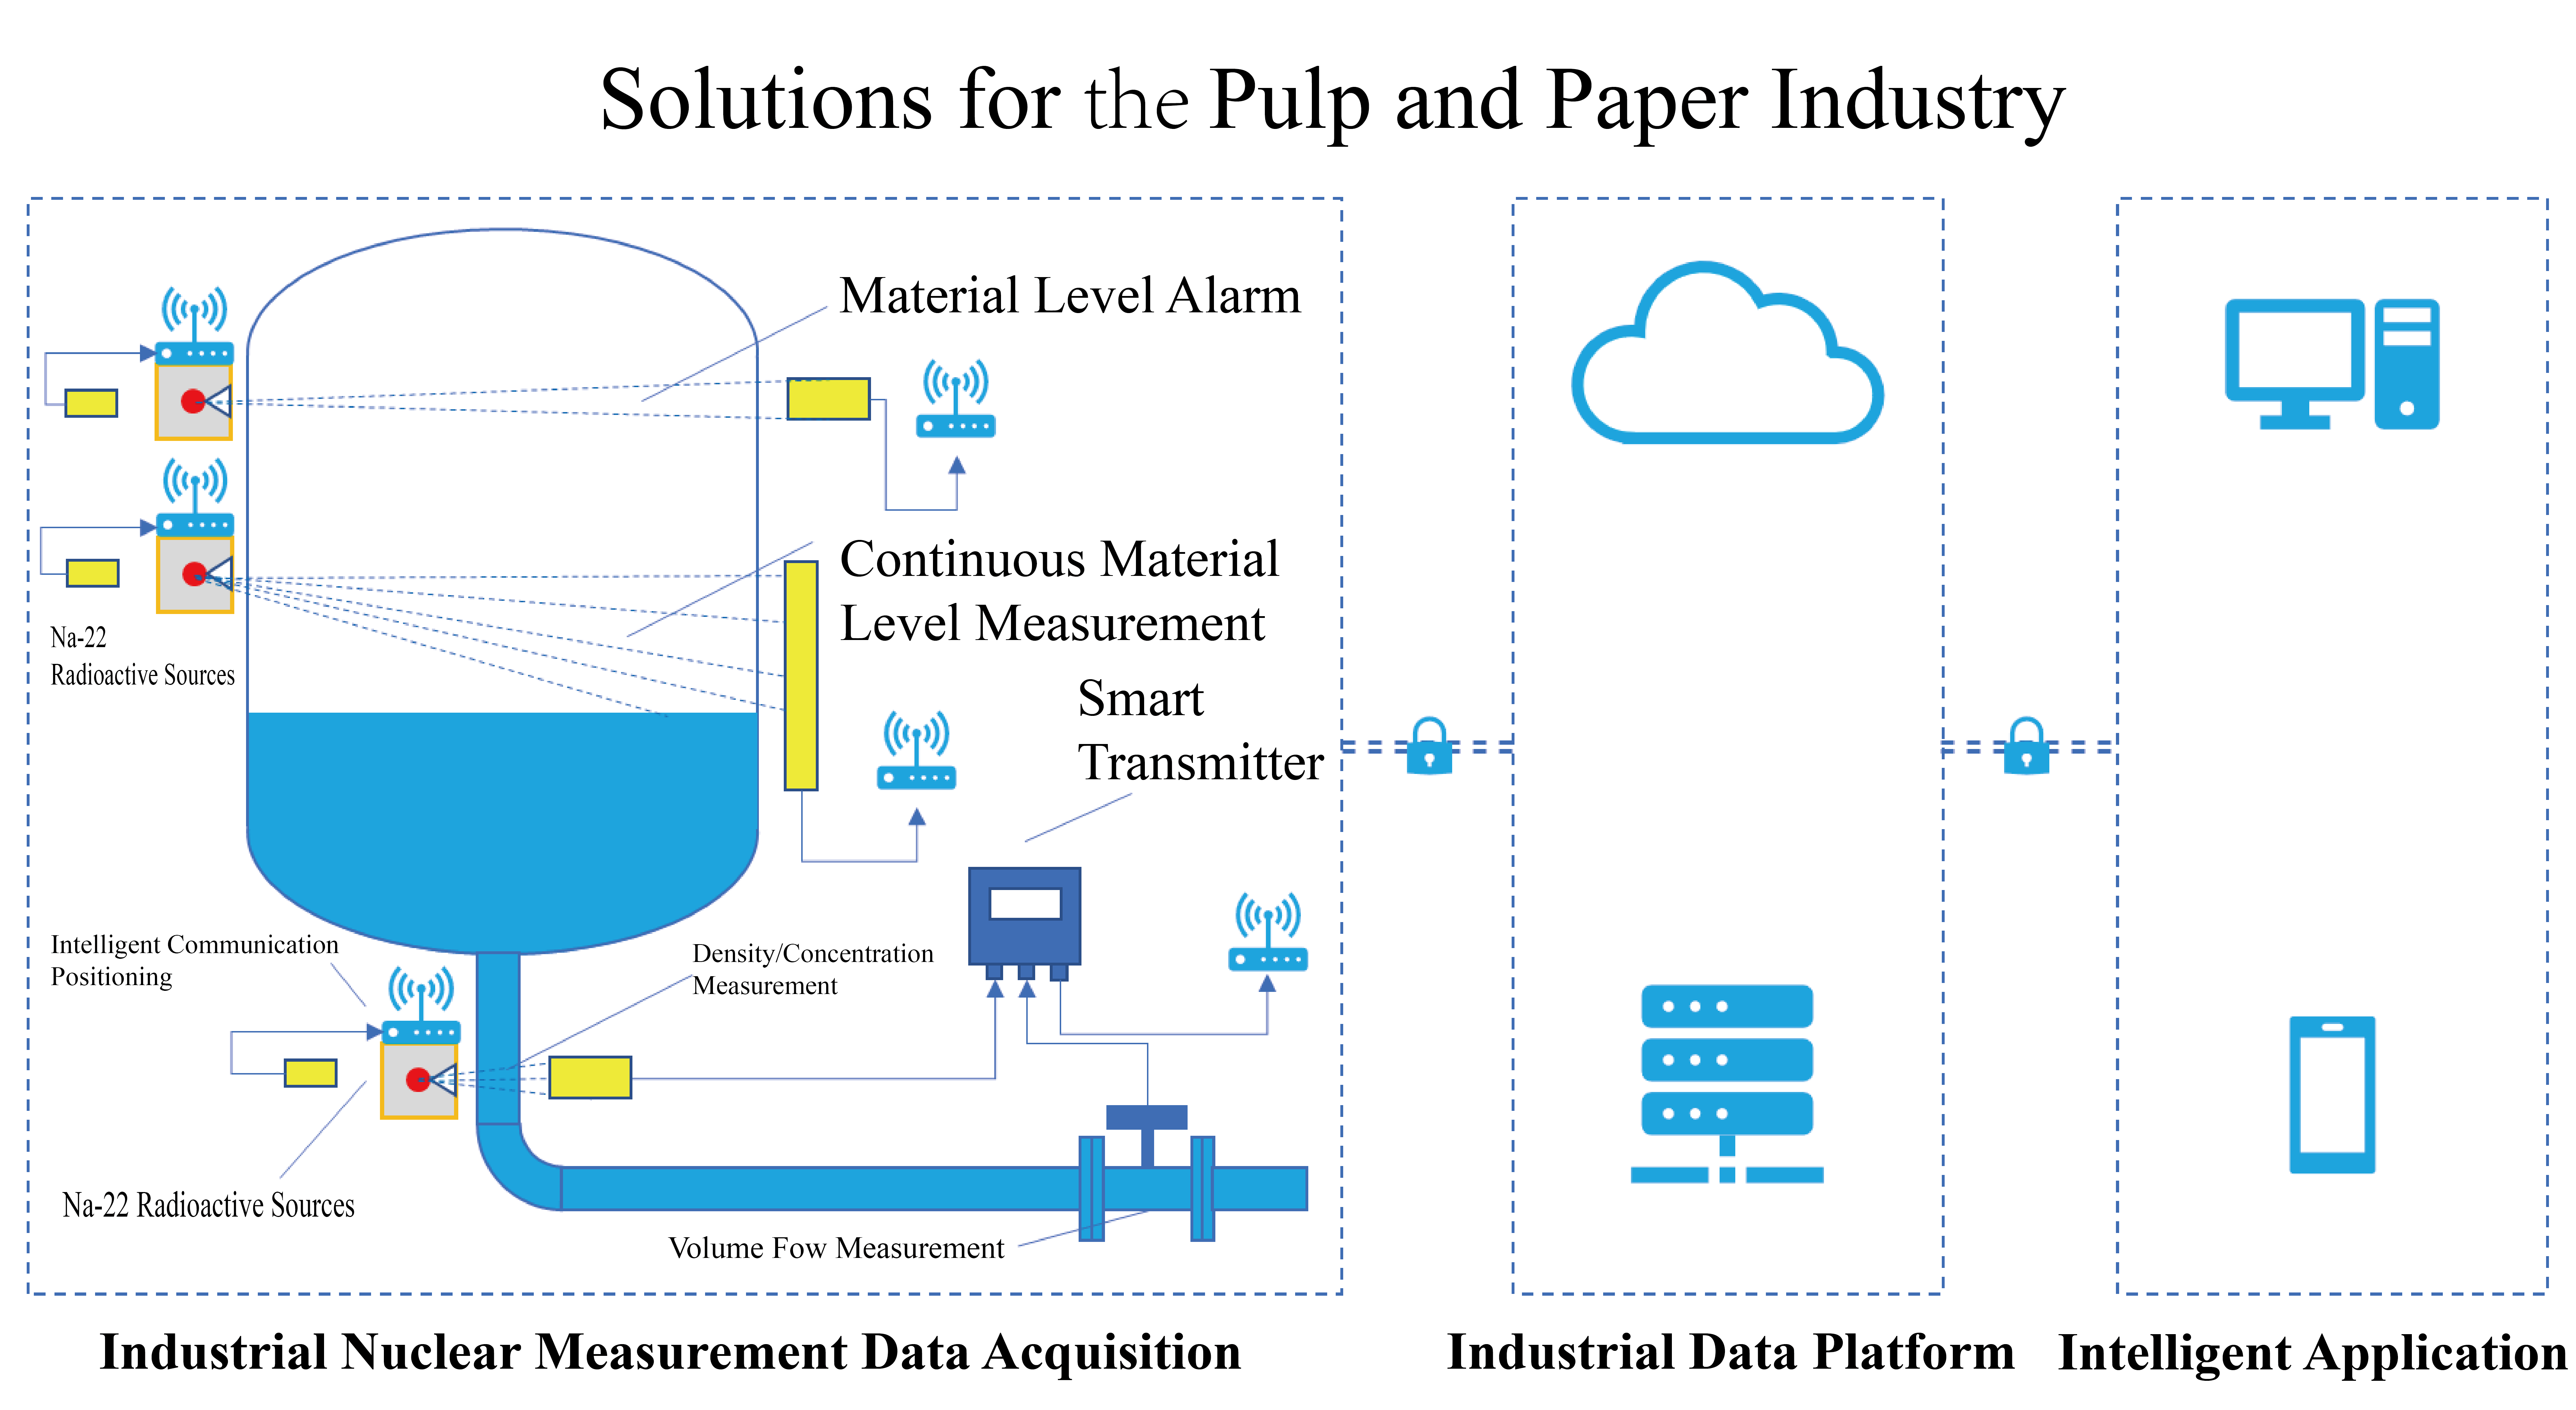 Solutions for the Pulp and paper industry